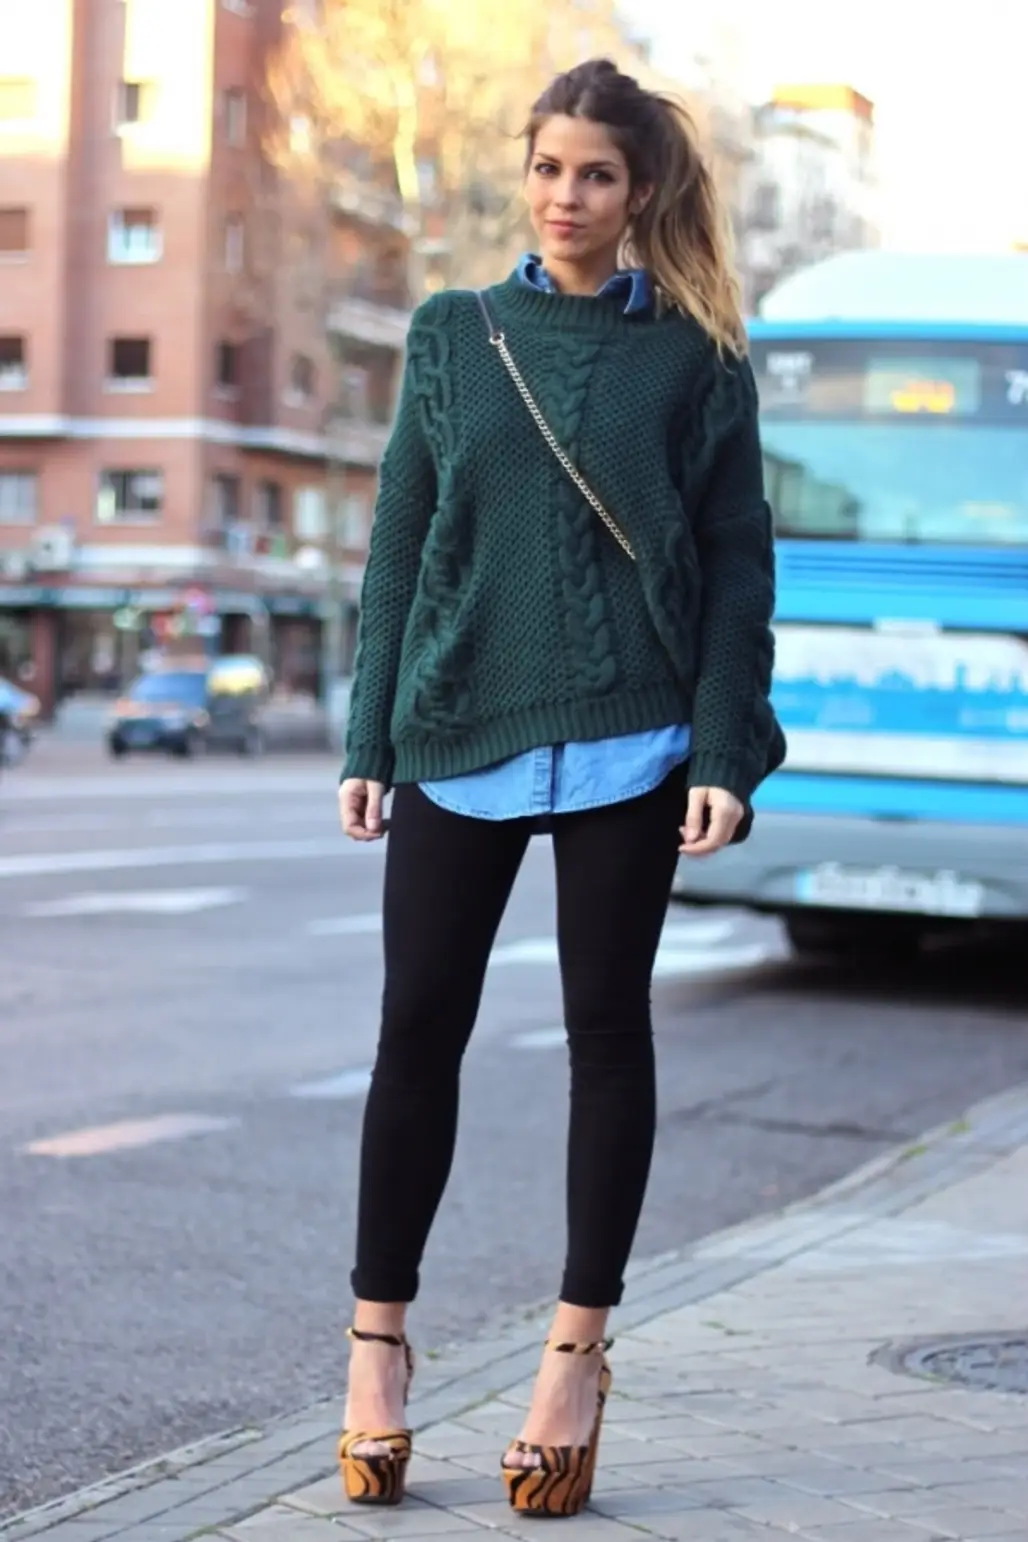 The Slouchy Jumper